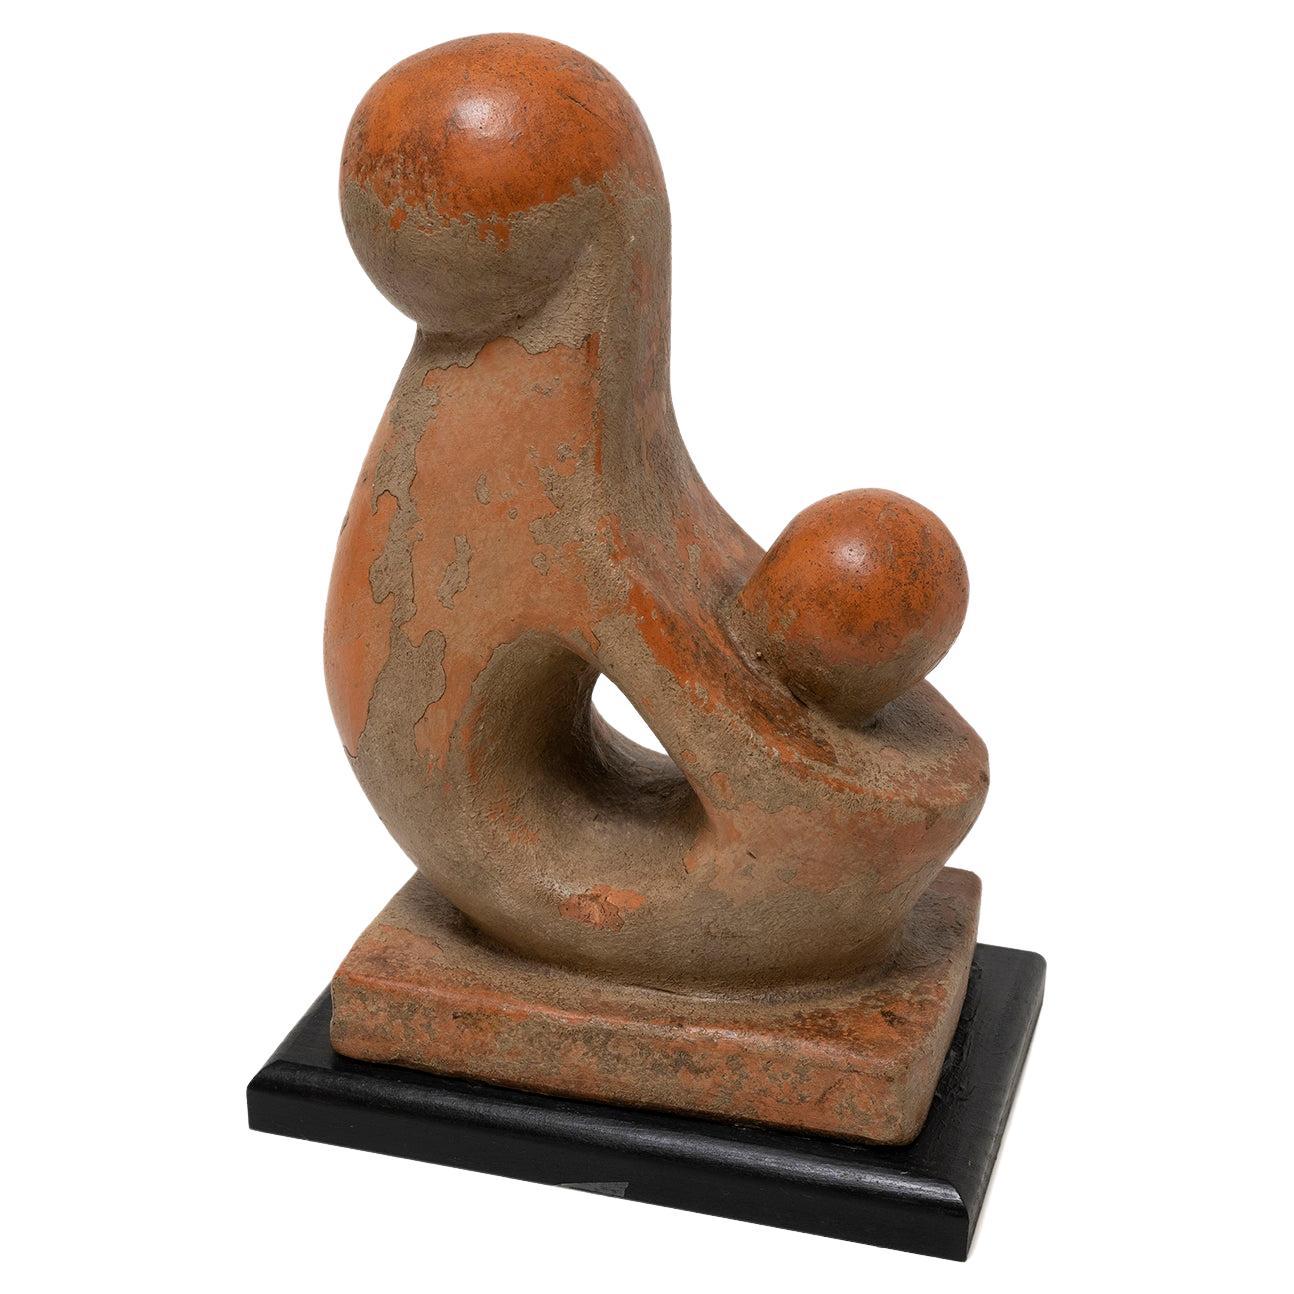 Sculpture Terracotta Stone Mother & Child Biomorphic 39cm 15 1/4“ high For Sale